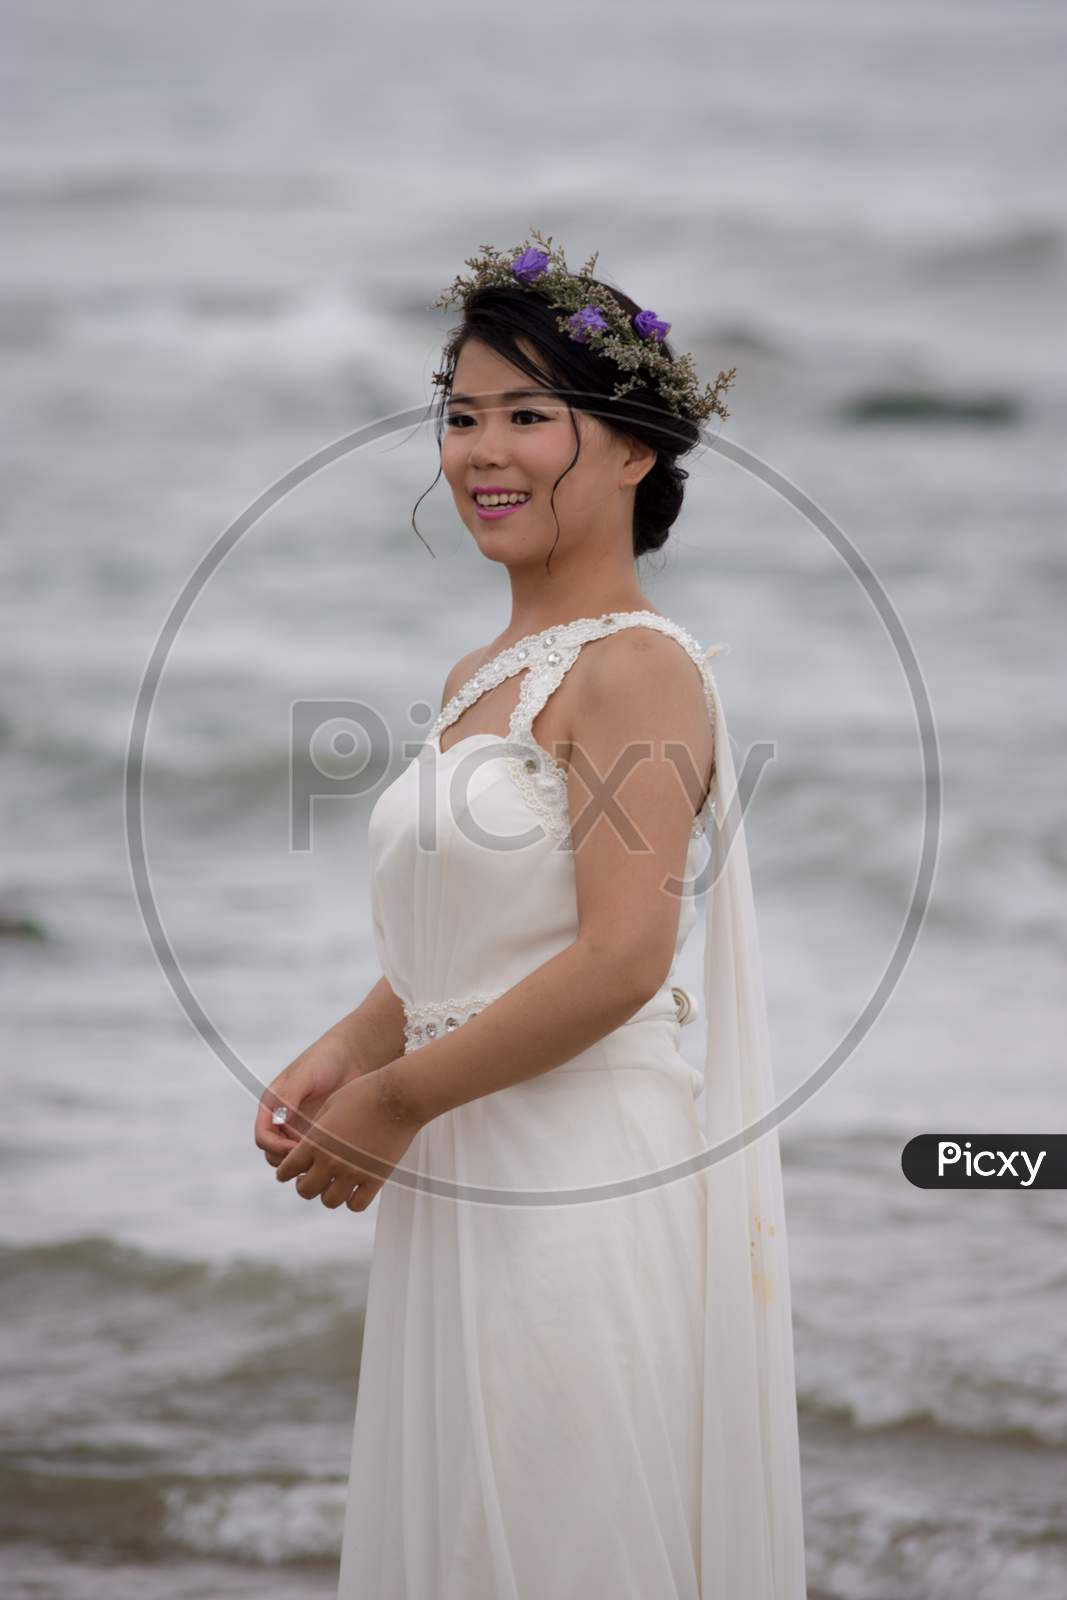 Chinese Bride In A White Wedding Dress Posing At The Beach